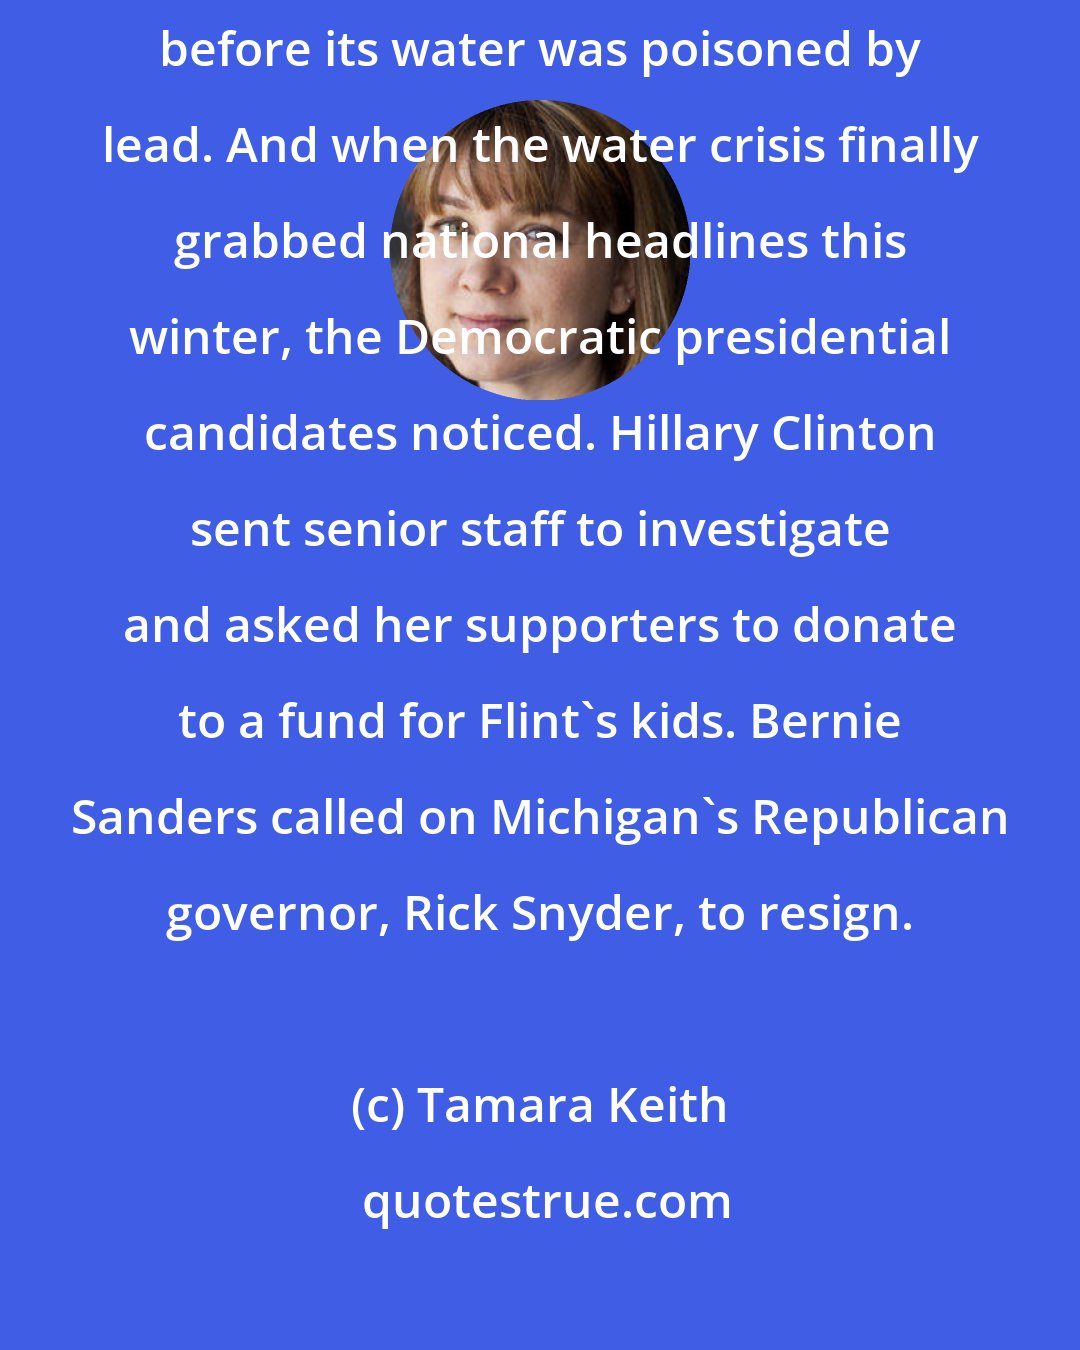 Tamara Keith: Flint is a city of a hundred thousand that was having a rough go of it even before its water was poisoned by lead. And when the water crisis finally grabbed national headlines this winter, the Democratic presidential candidates noticed. Hillary Clinton sent senior staff to investigate and asked her supporters to donate to a fund for Flint's kids. Bernie Sanders called on Michigan's Republican governor, Rick Snyder, to resign.